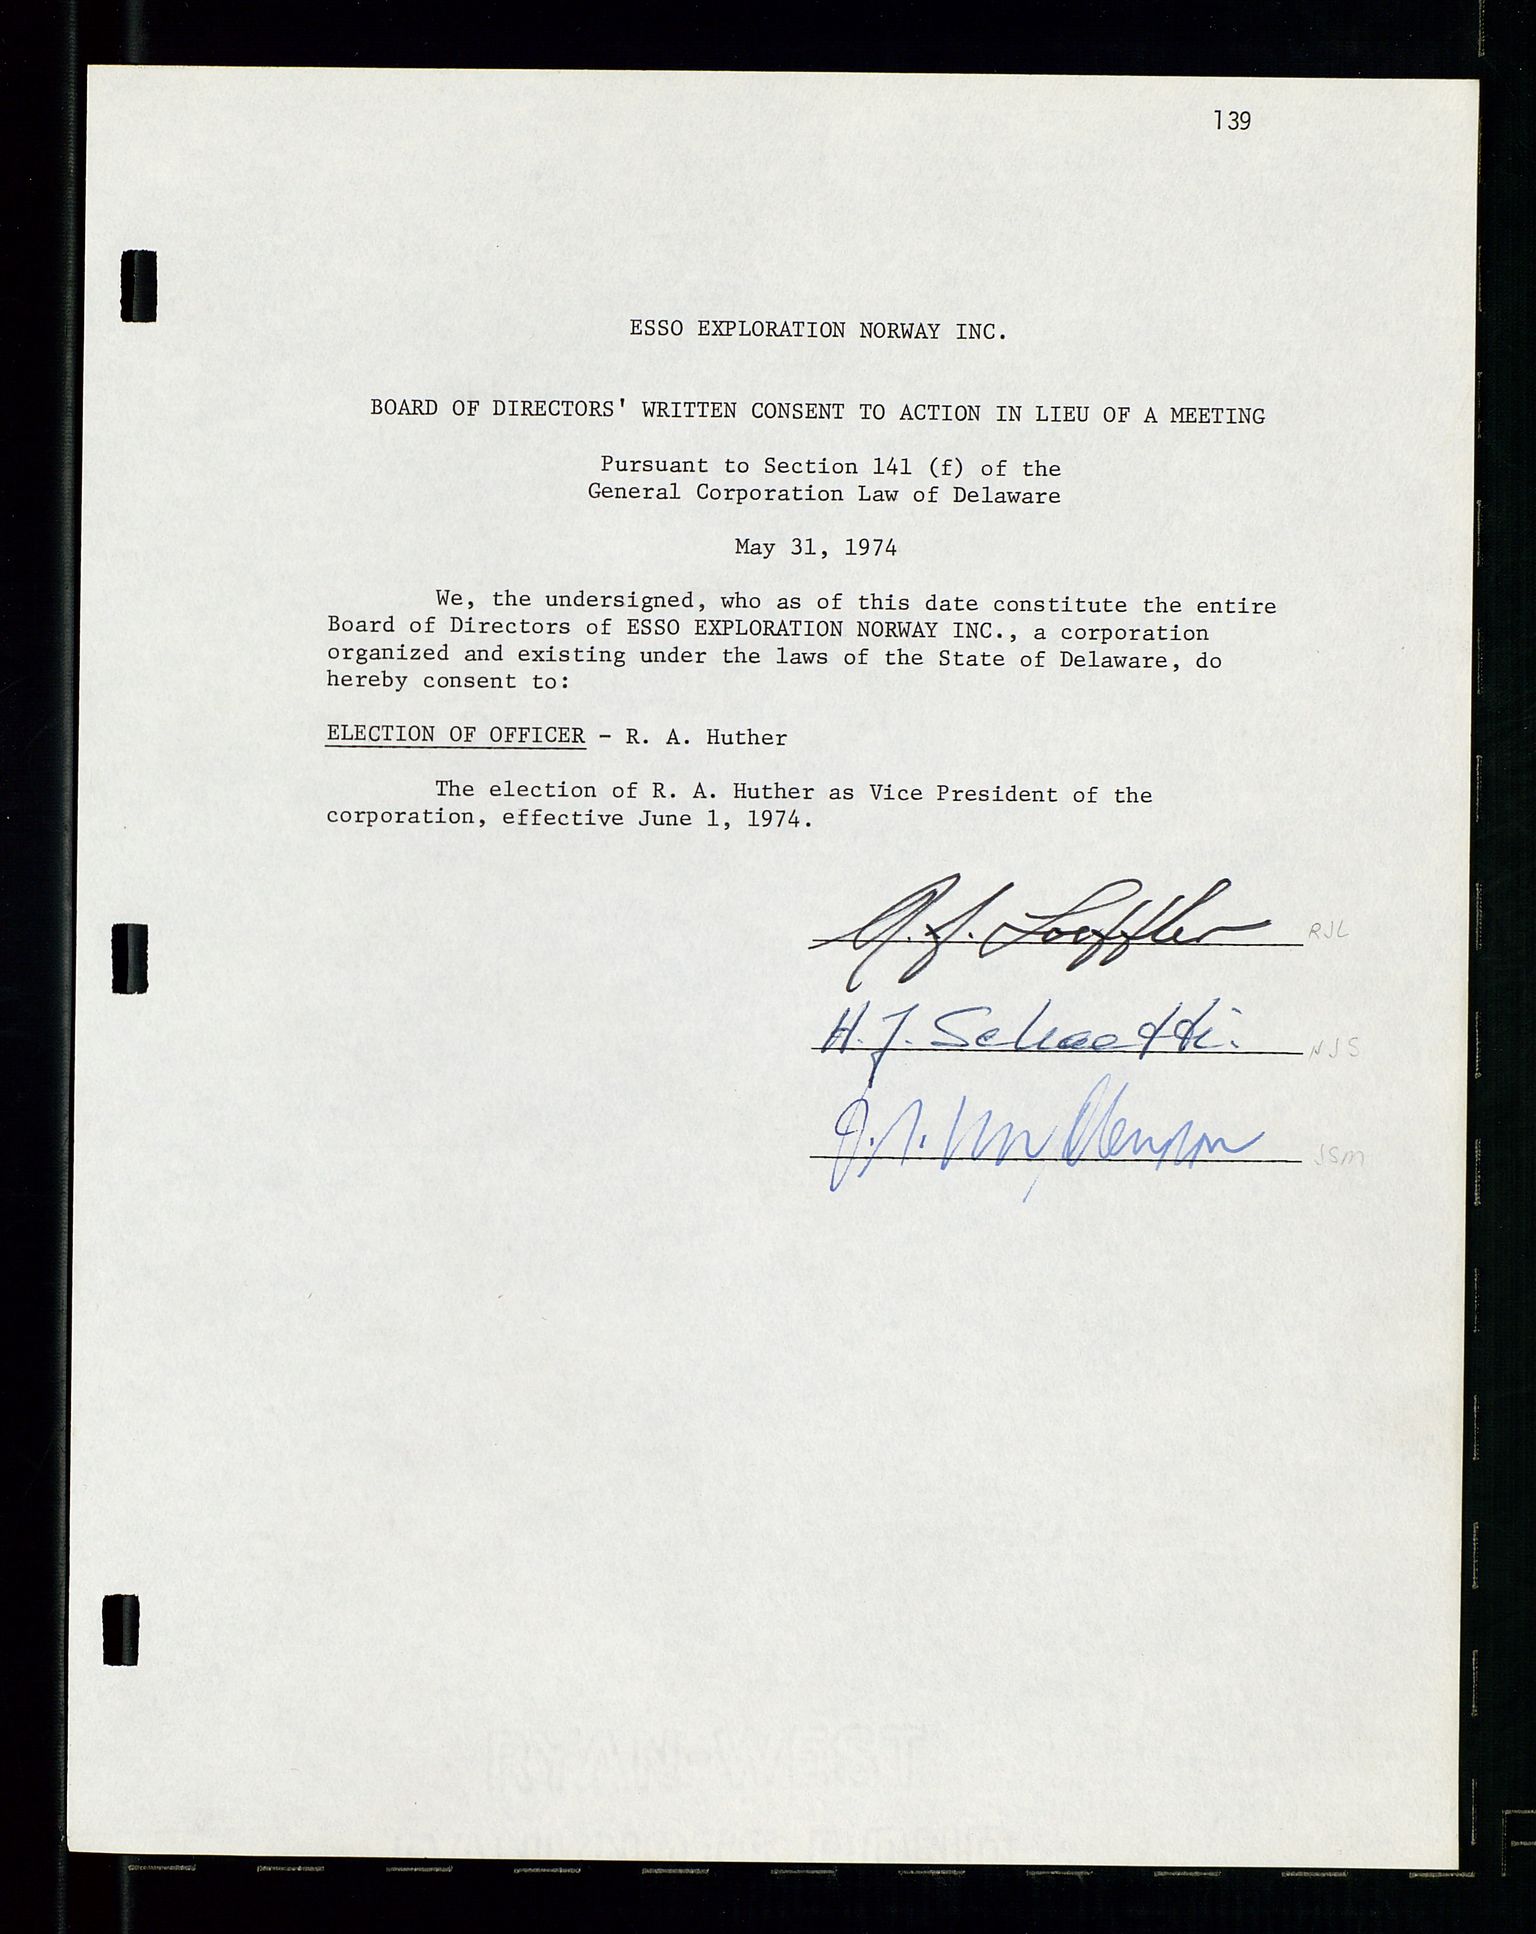 Pa 1512 - Esso Exploration and Production Norway Inc., SAST/A-101917/A/Aa/L0001/0001: Styredokumenter / Corporate records, By-Laws, Board meeting minutes, Incorporations, 1965-1975, s. 139